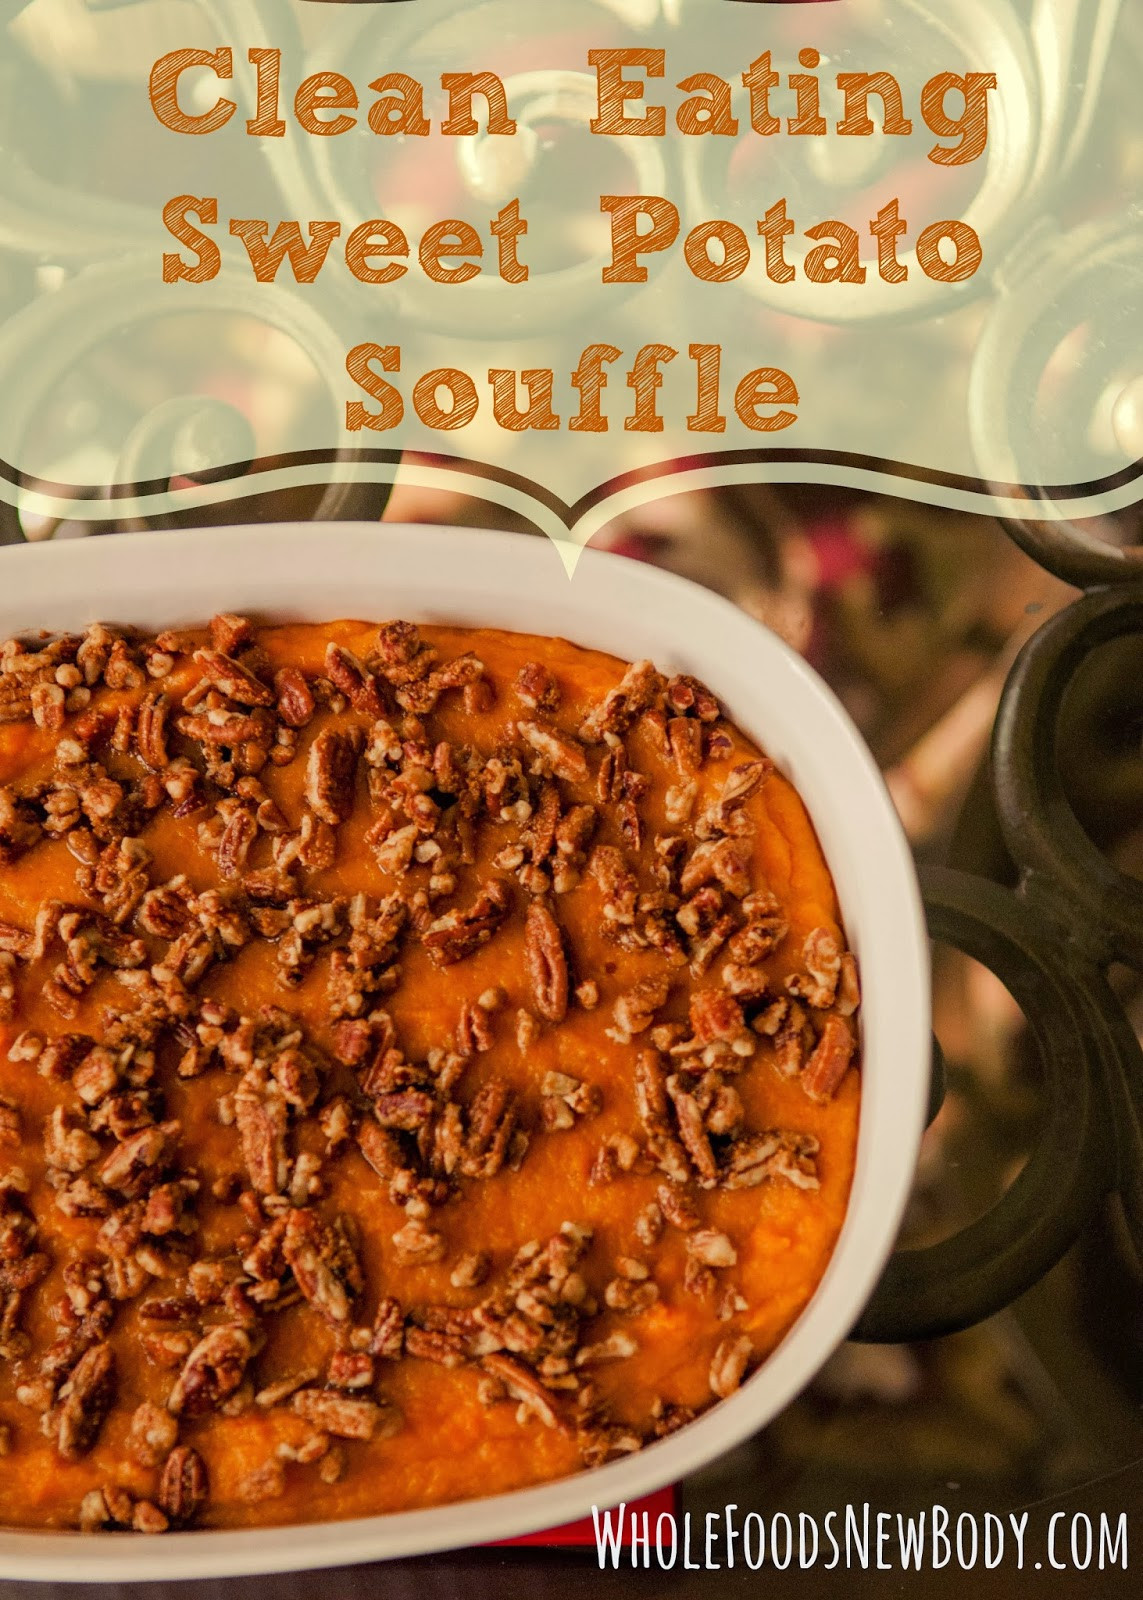 Clean Eating Sweet Potato
 Whole Foods New Body Clean Eating Sweet Potato Souffle